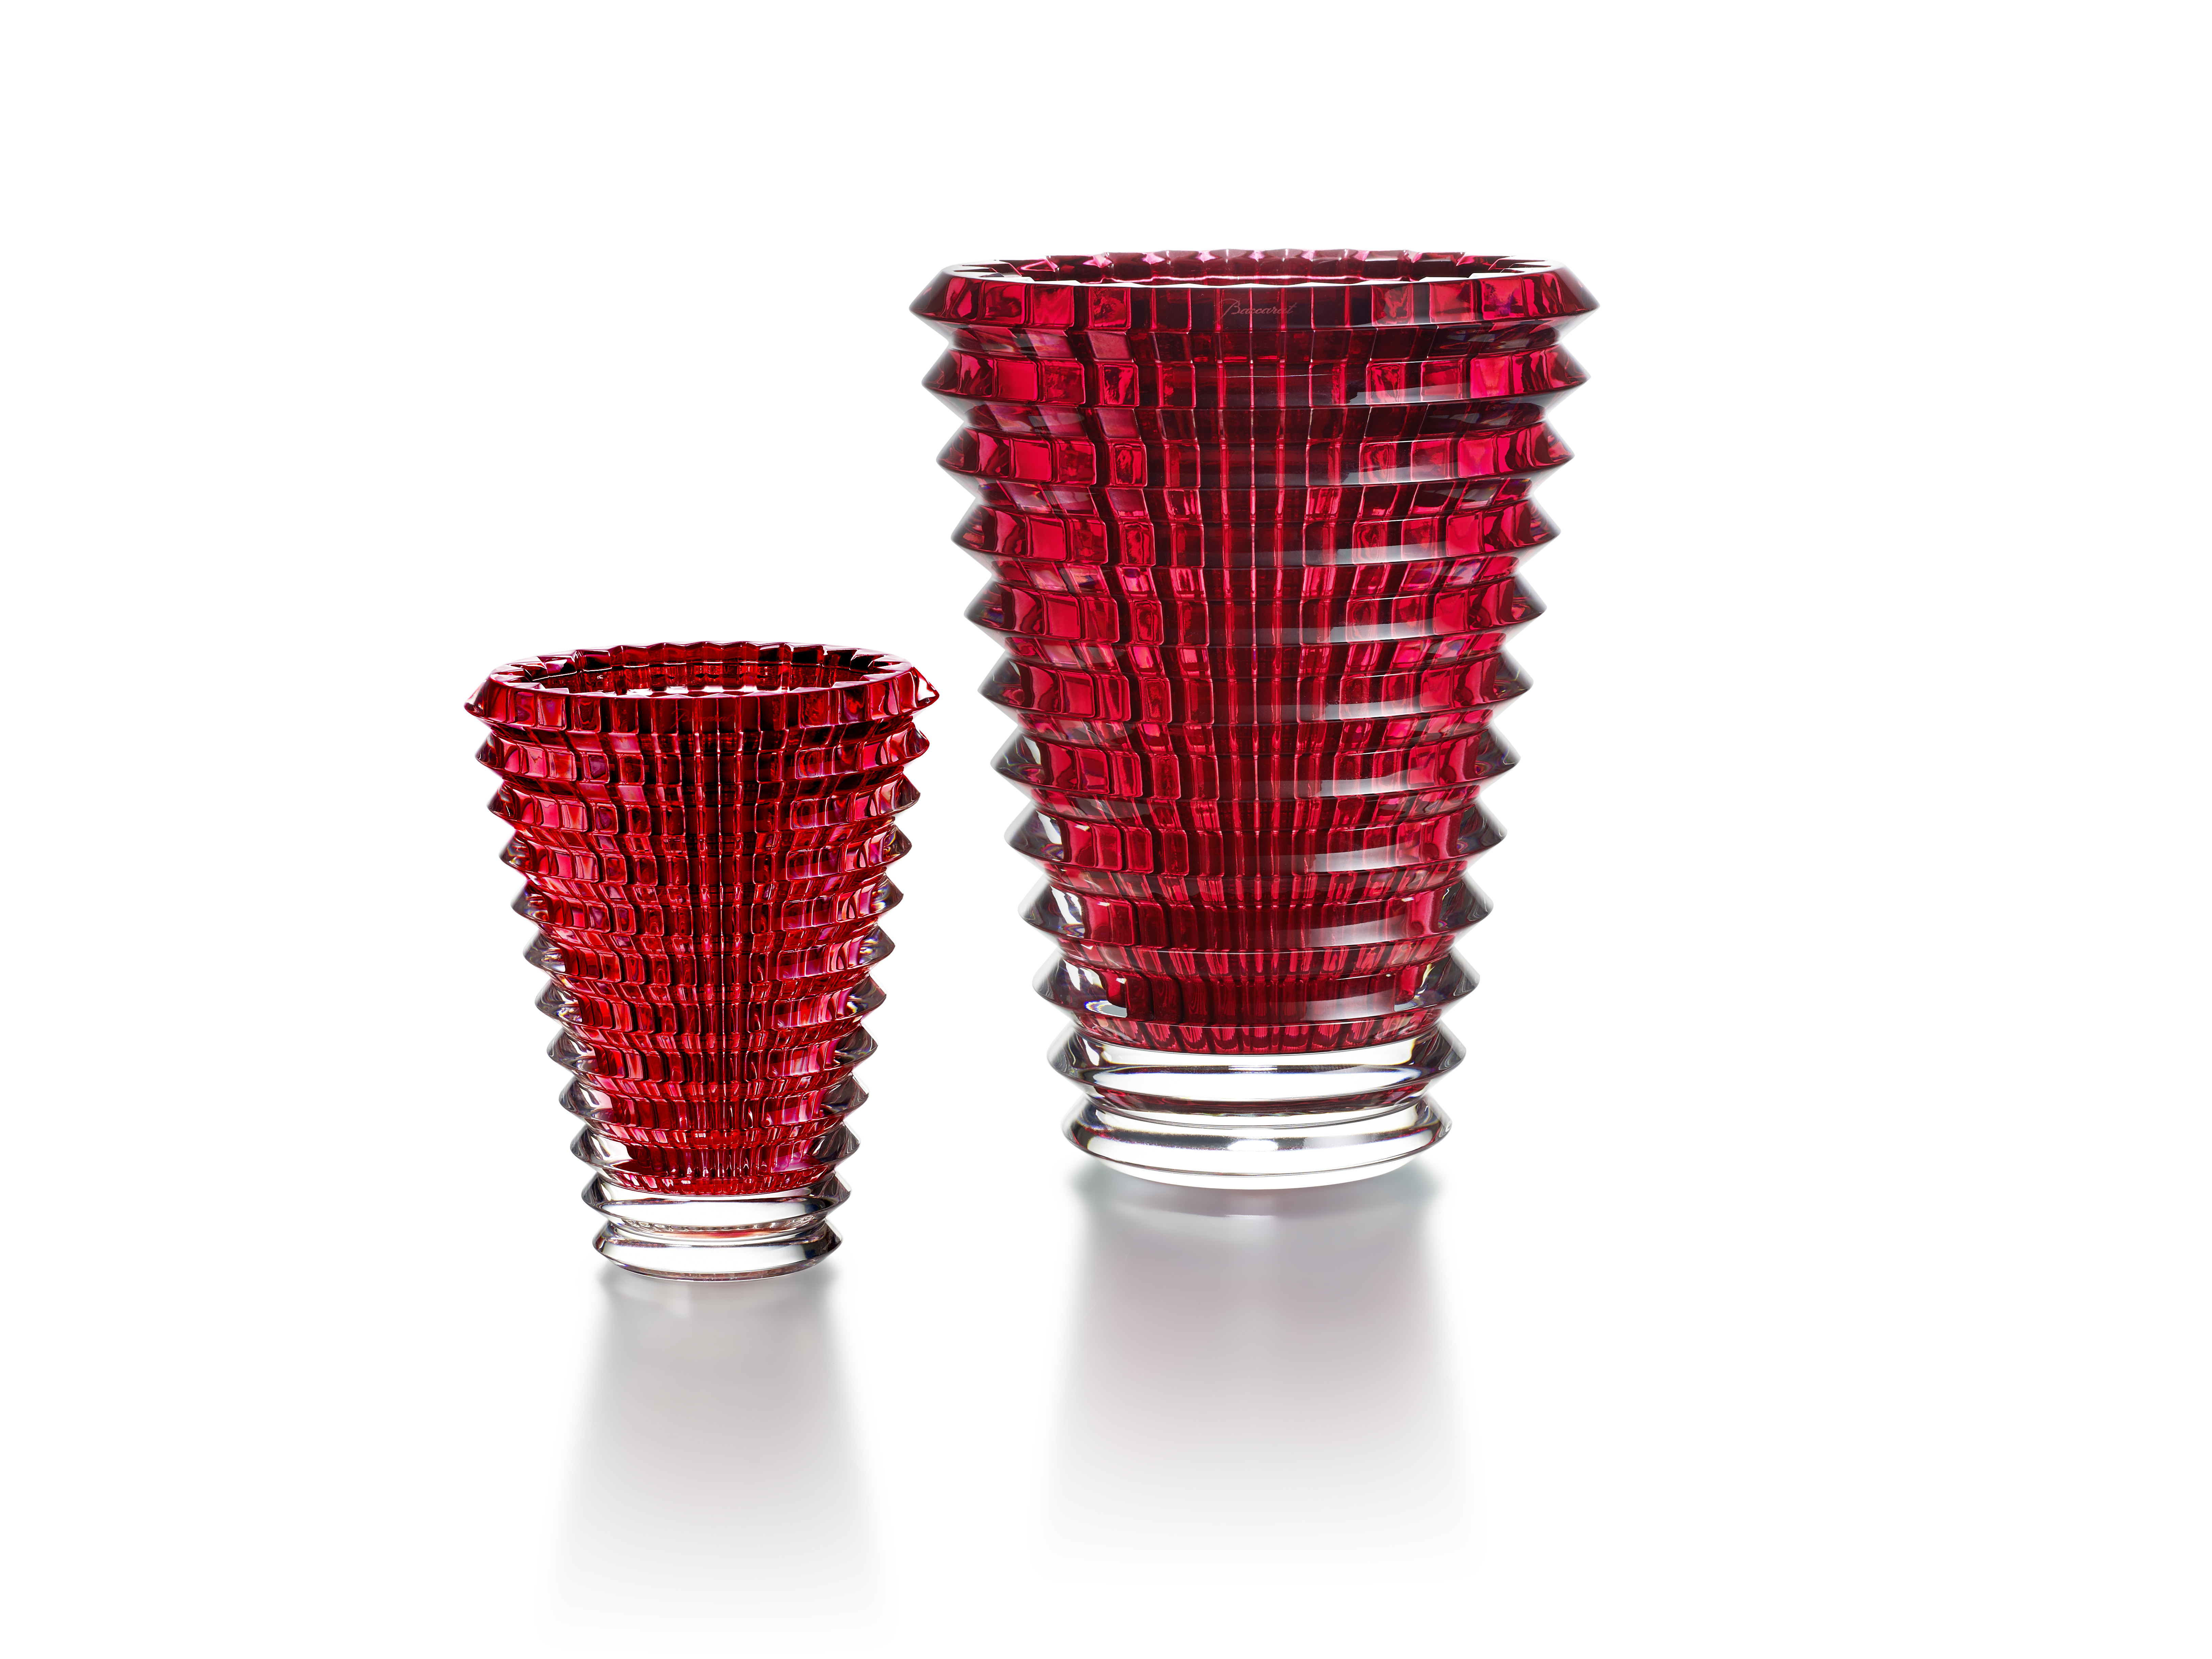 13 Nice Baccarat Small Eye Vase 2024 free download baccarat small eye vase of vase eye oval red luxuo intended for vase eye oval red